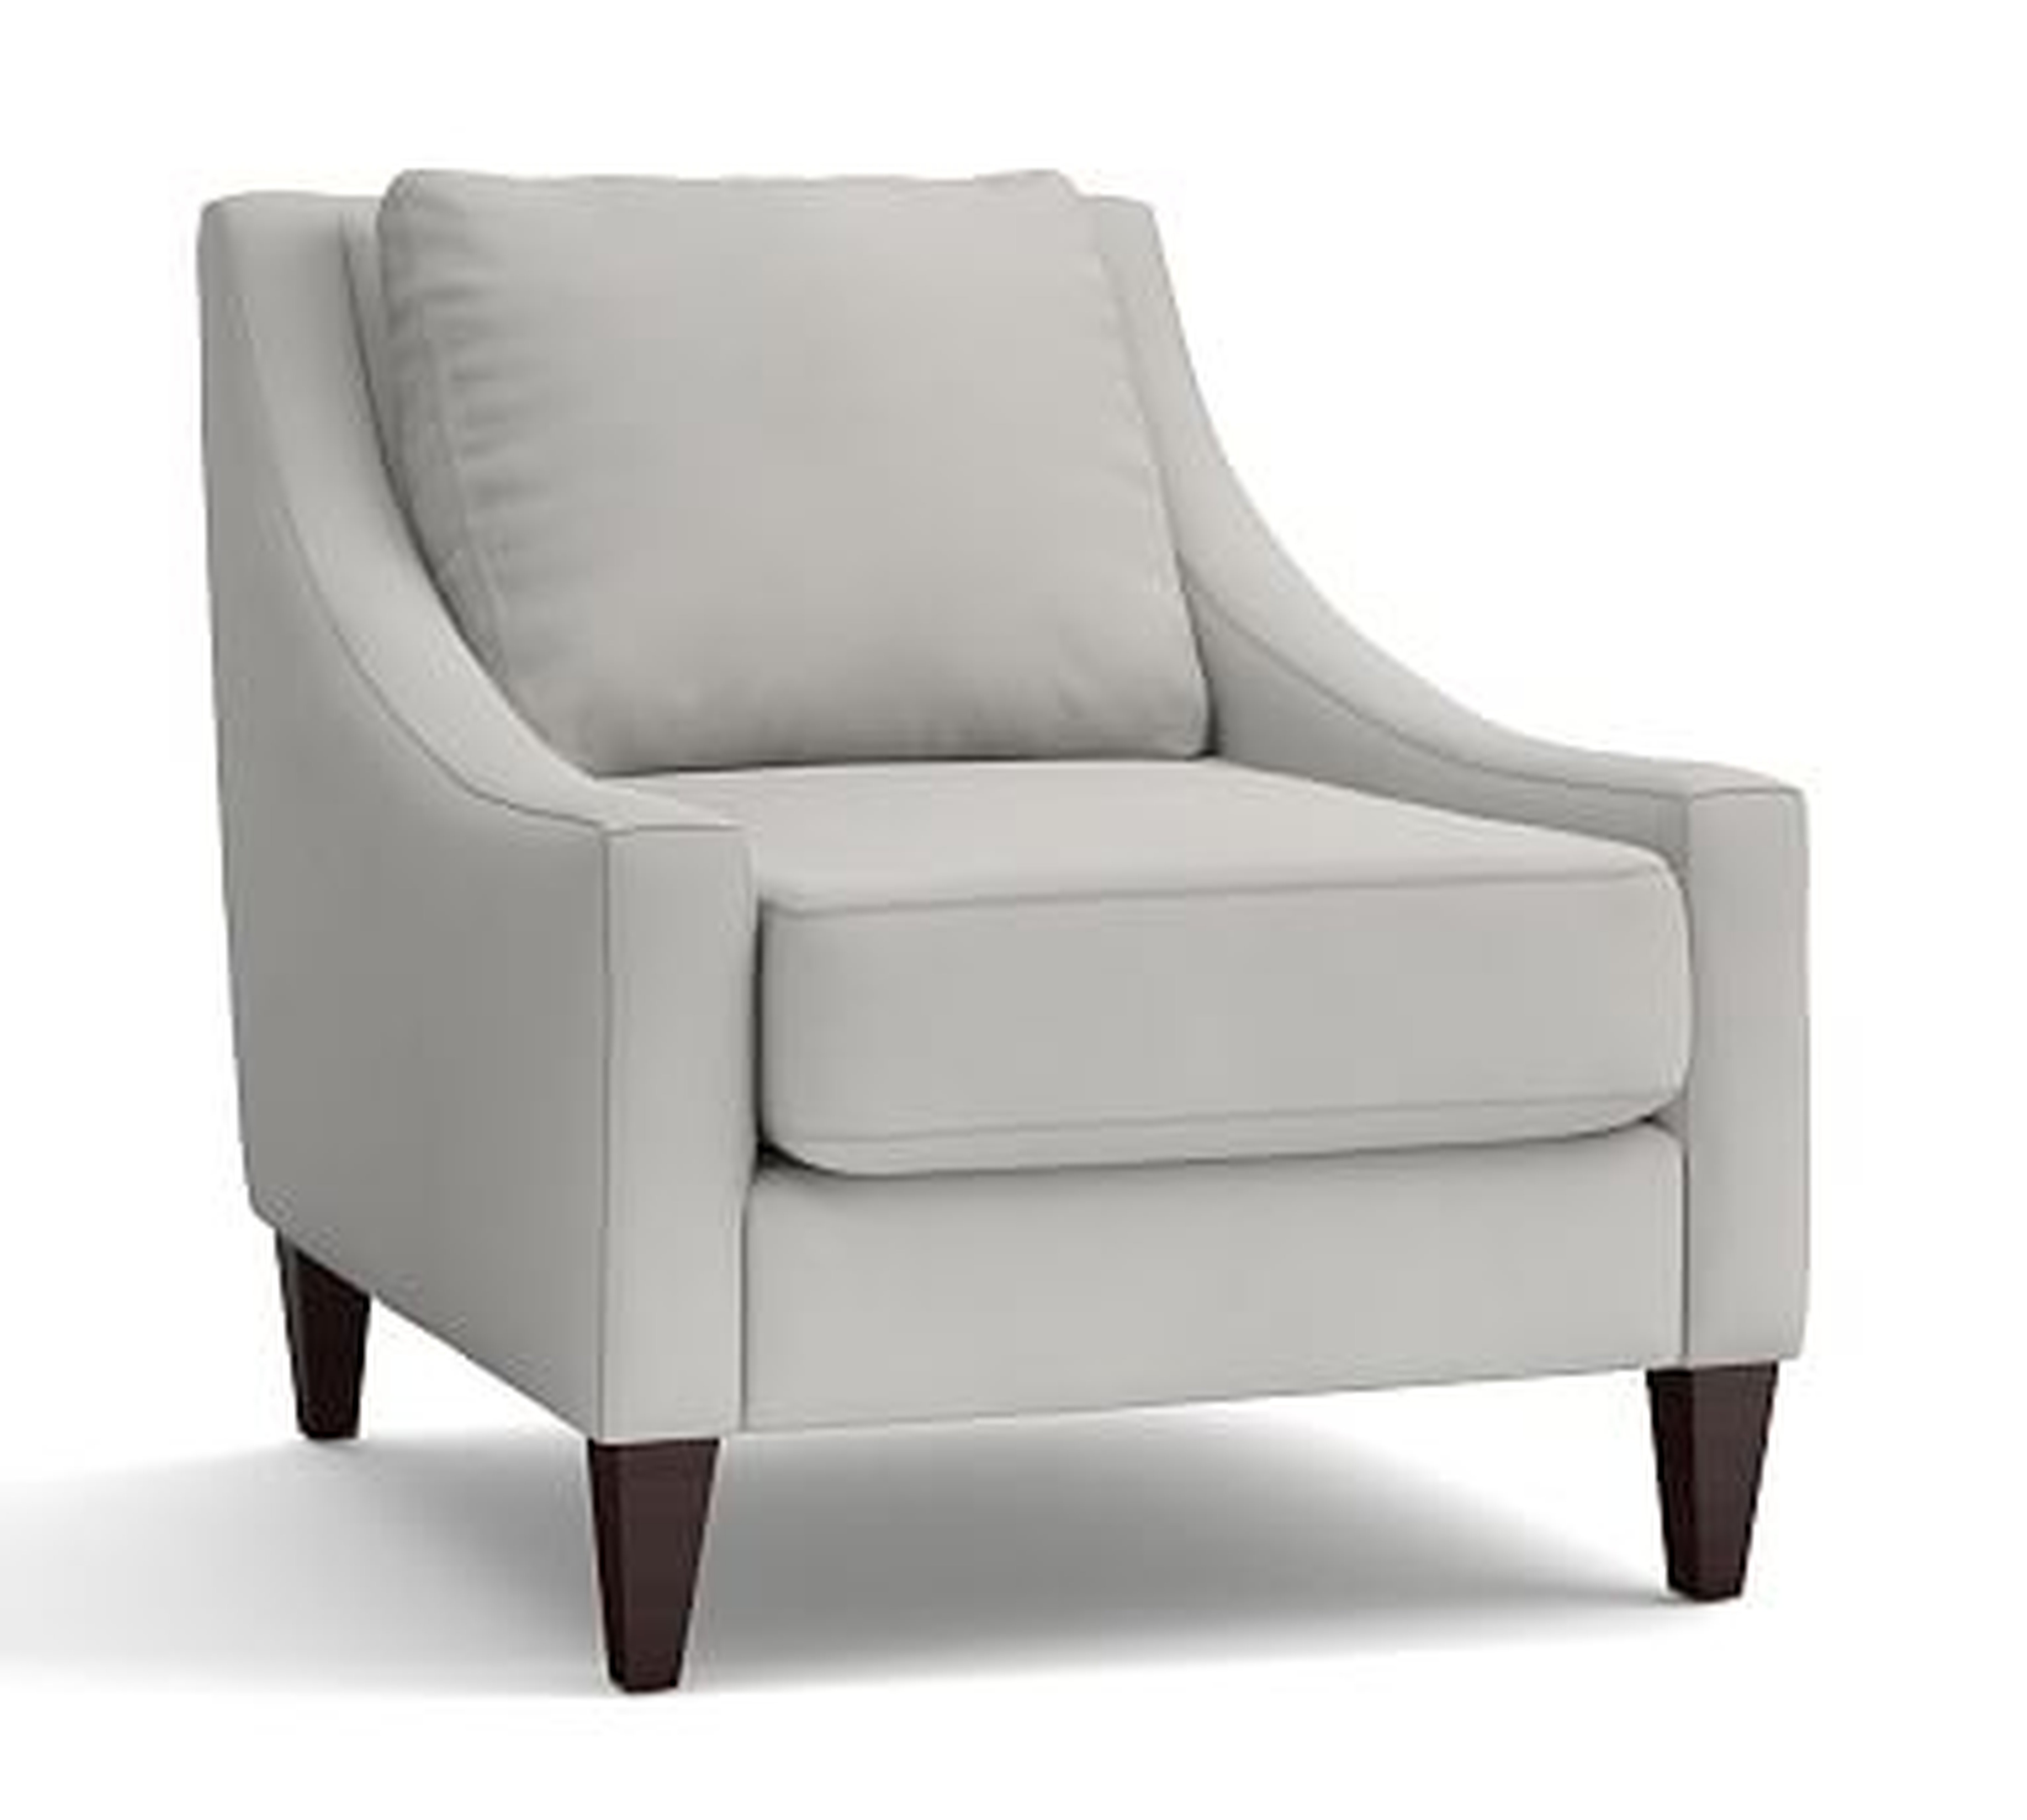 Aiden Upholstered Armchair, Polyester Wrapped Cushions, Organic Cotton Twill Gray - Pottery Barn